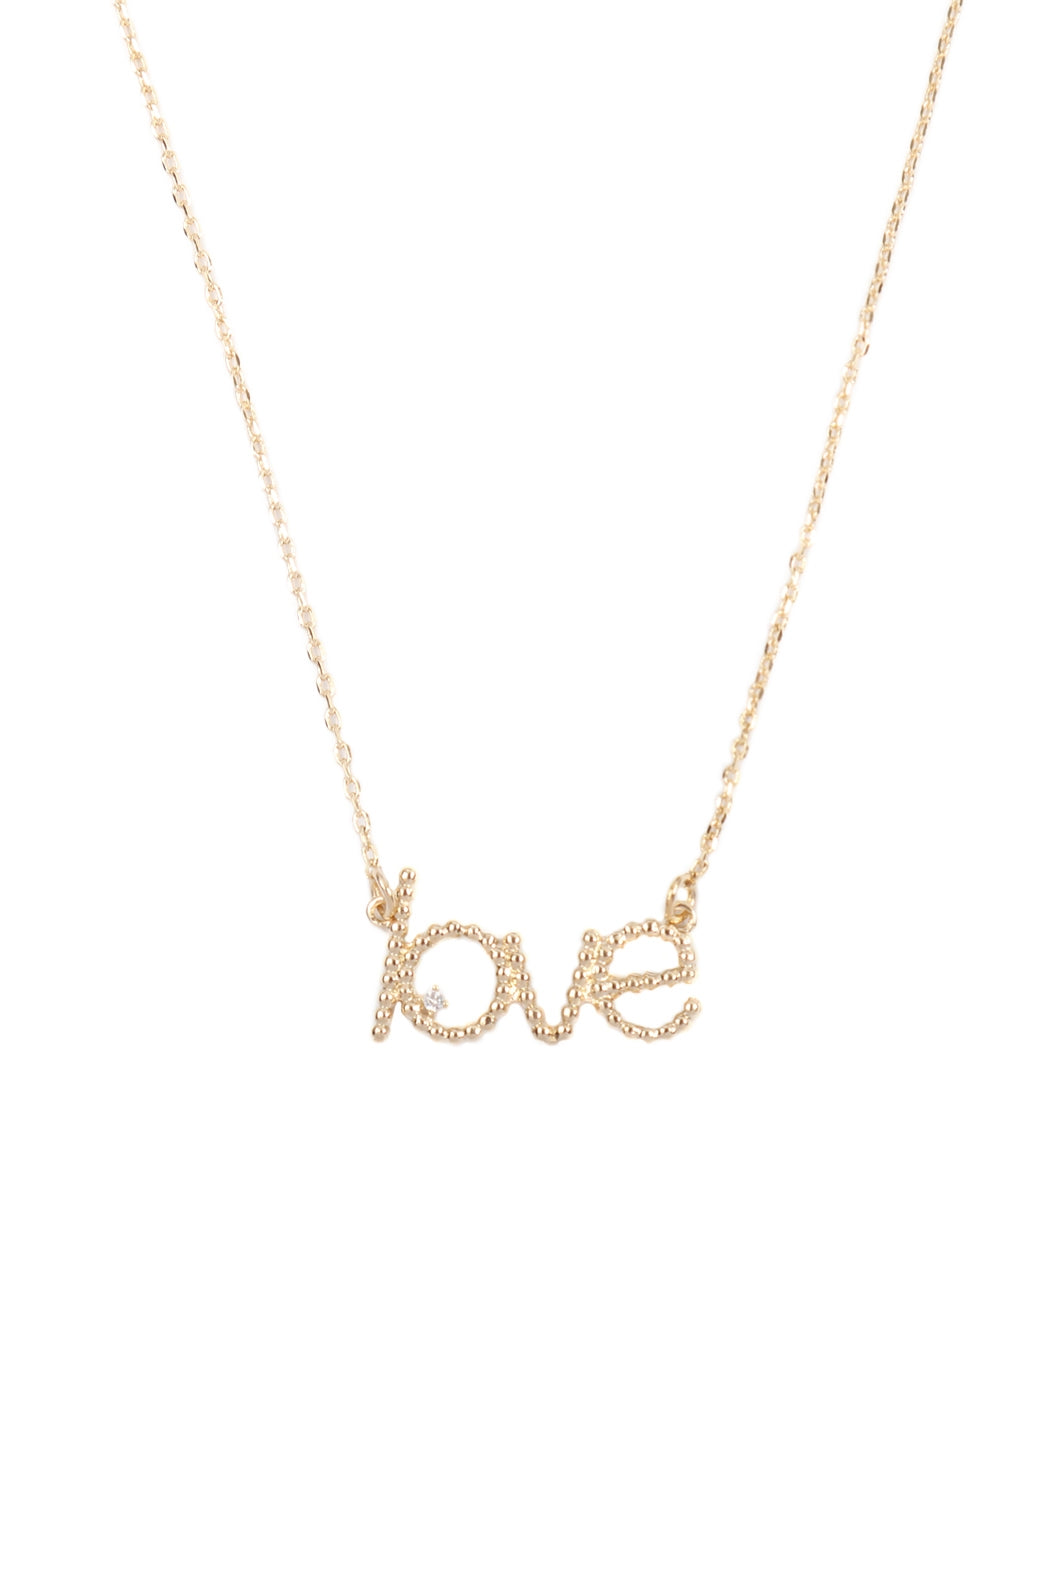 BALL TEXTURE "LOVE" NECKLACE